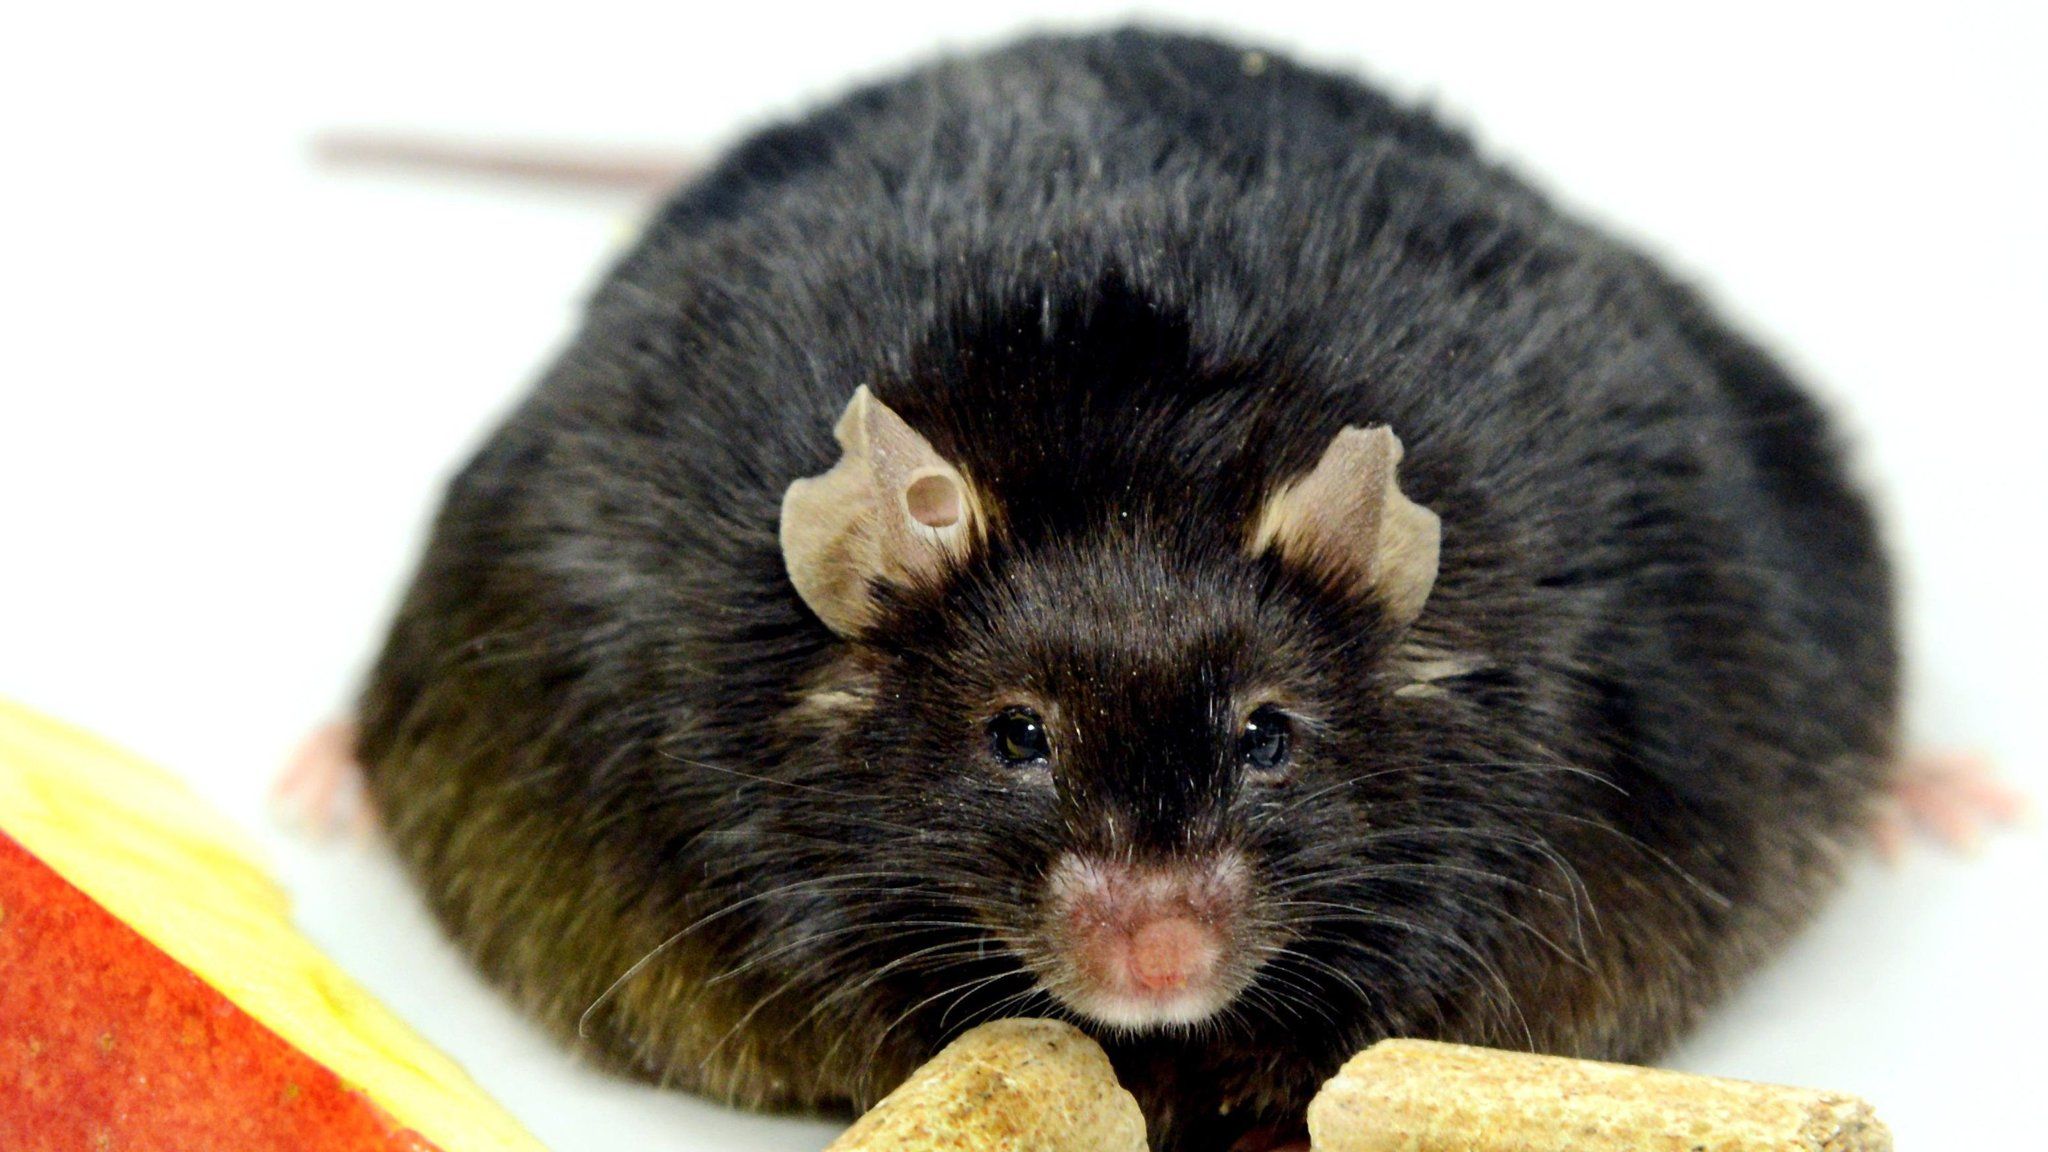 Obese rodents give scientists some food for thought